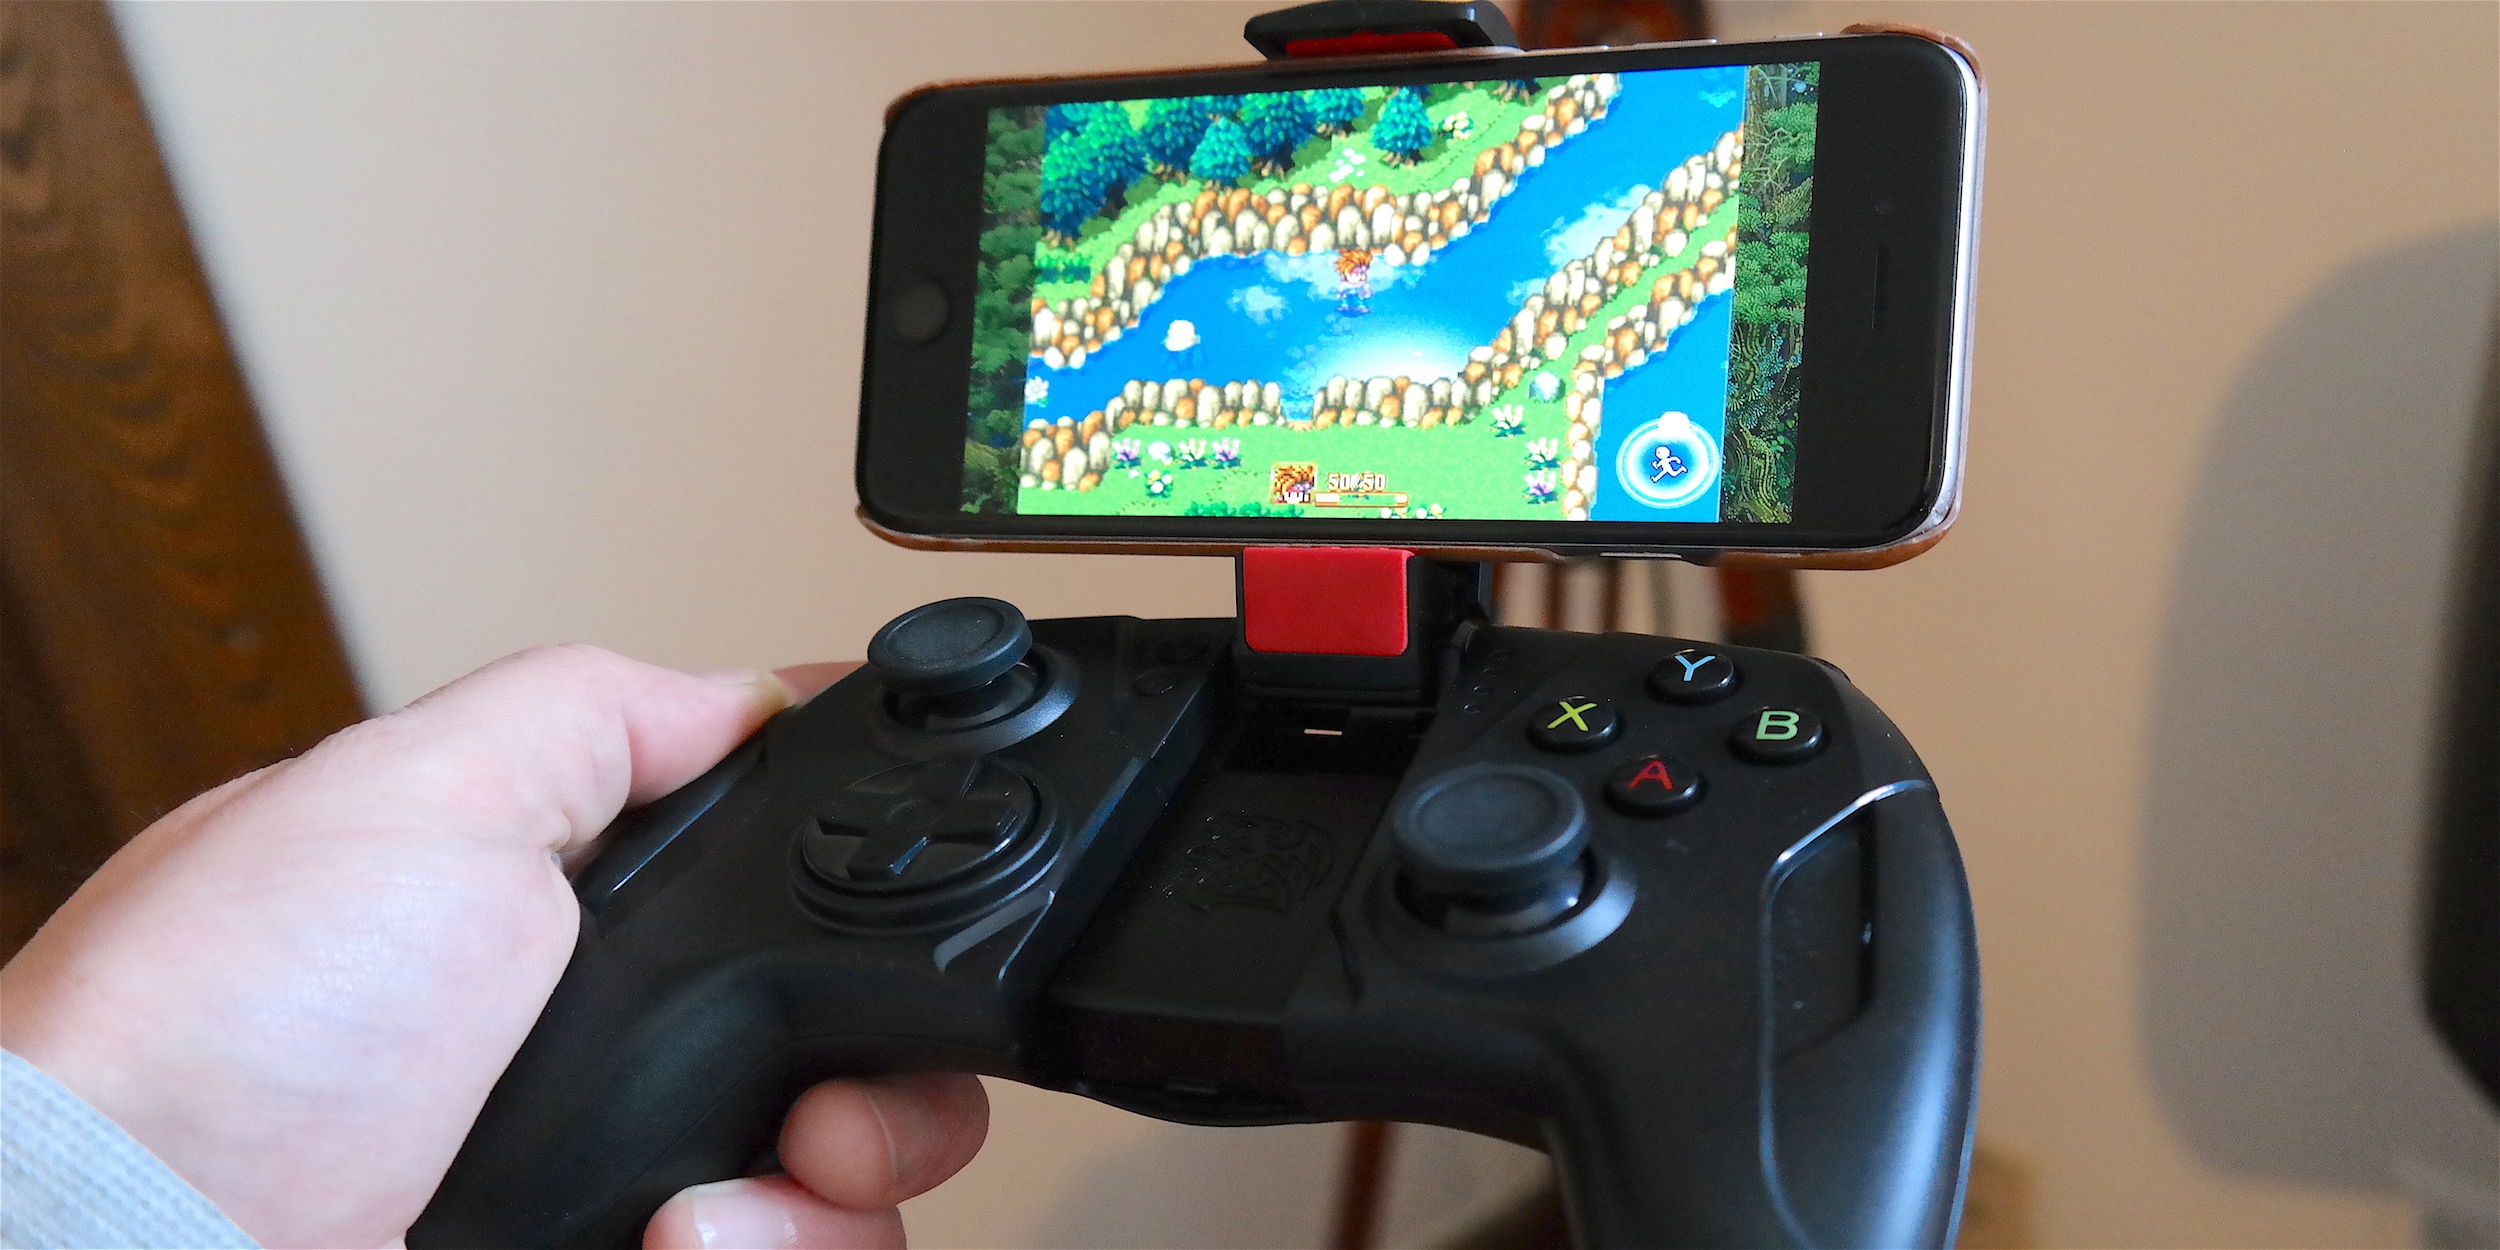 Review: Tt Contour Made-for-iPhone/iPad/Apple TV game controller -